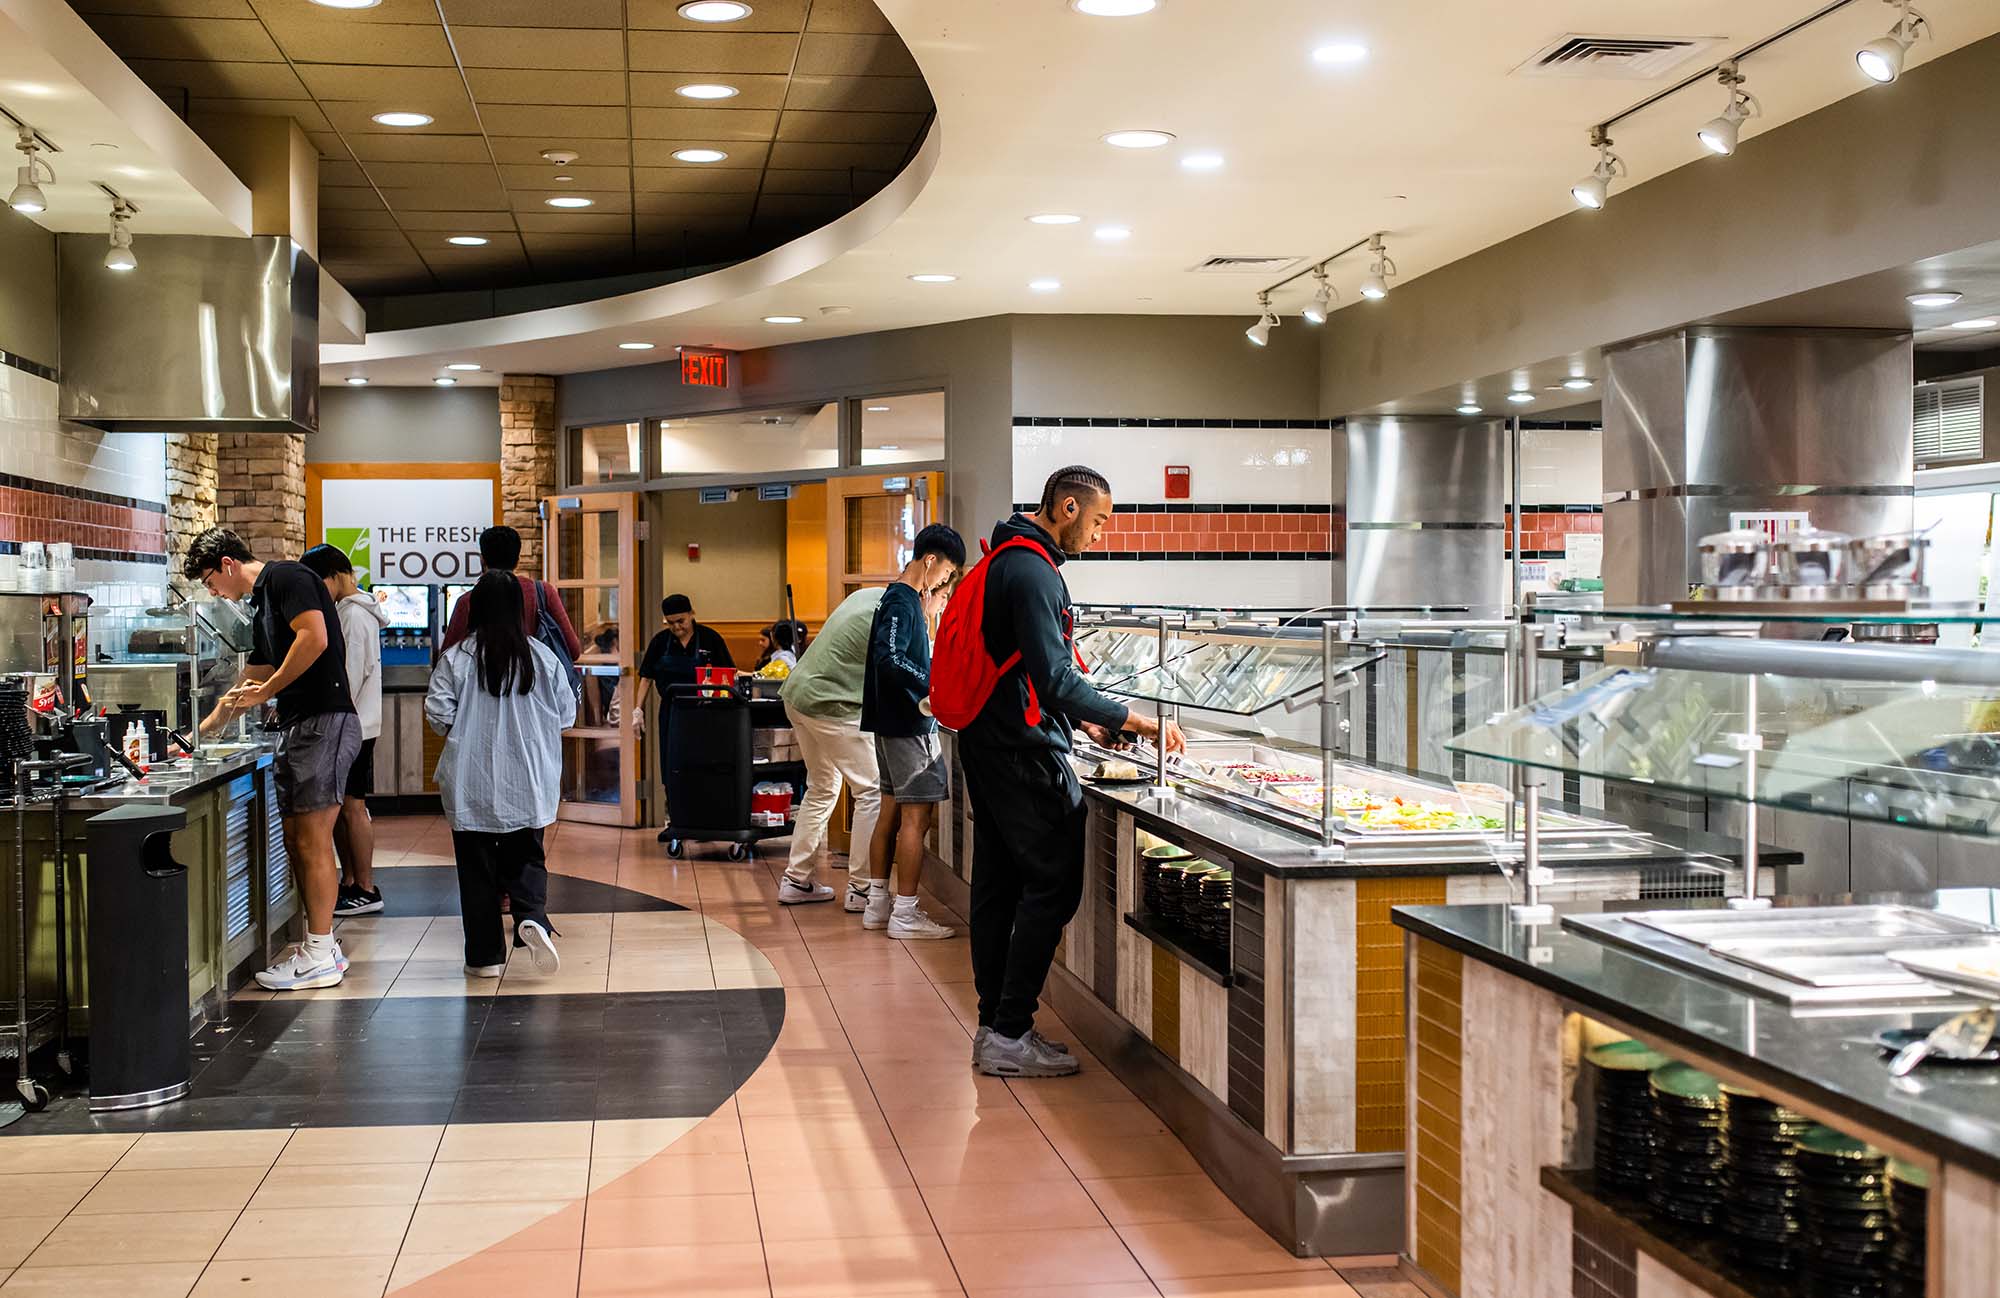 Photo: Students are shown sitting, eating, and getting food at the Fresh Food Co. dining hall in BU's West Campus.